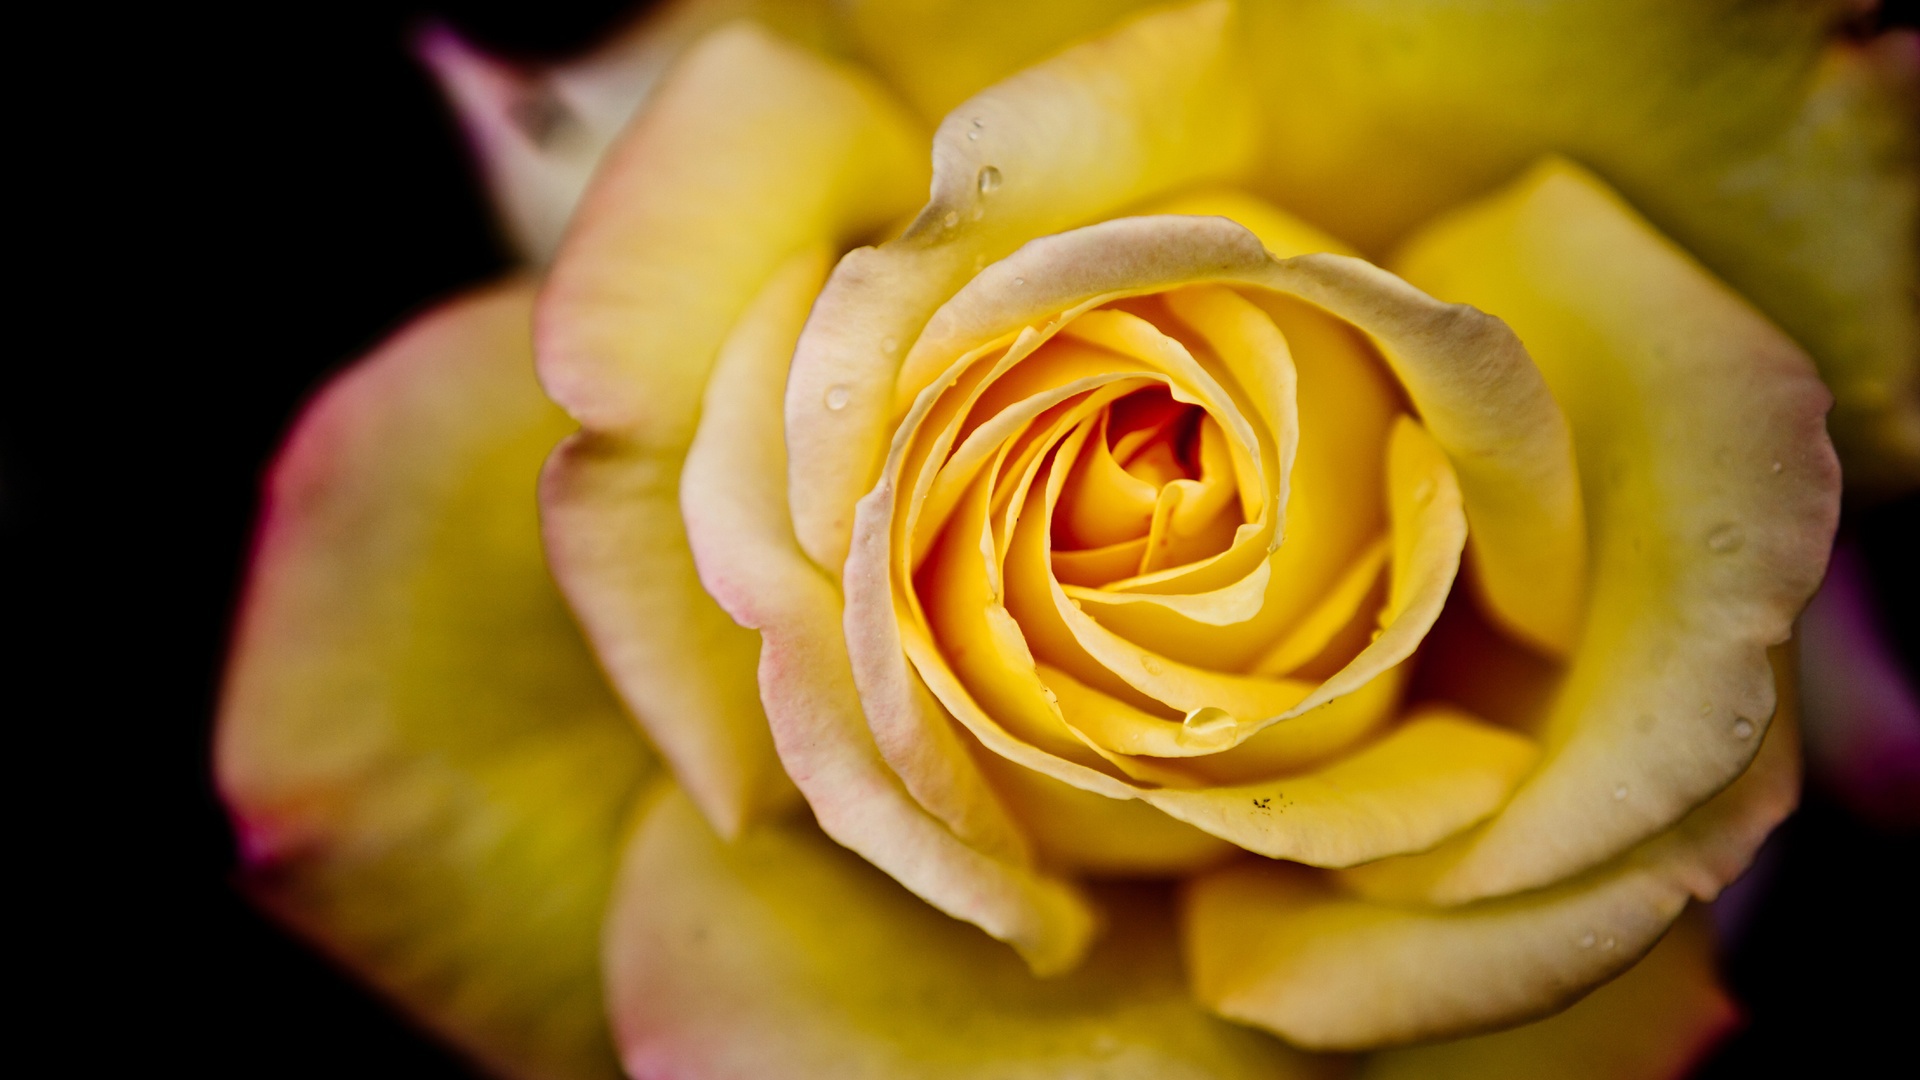 Big Yellow Rose On A Black Background Wallpaper And Image